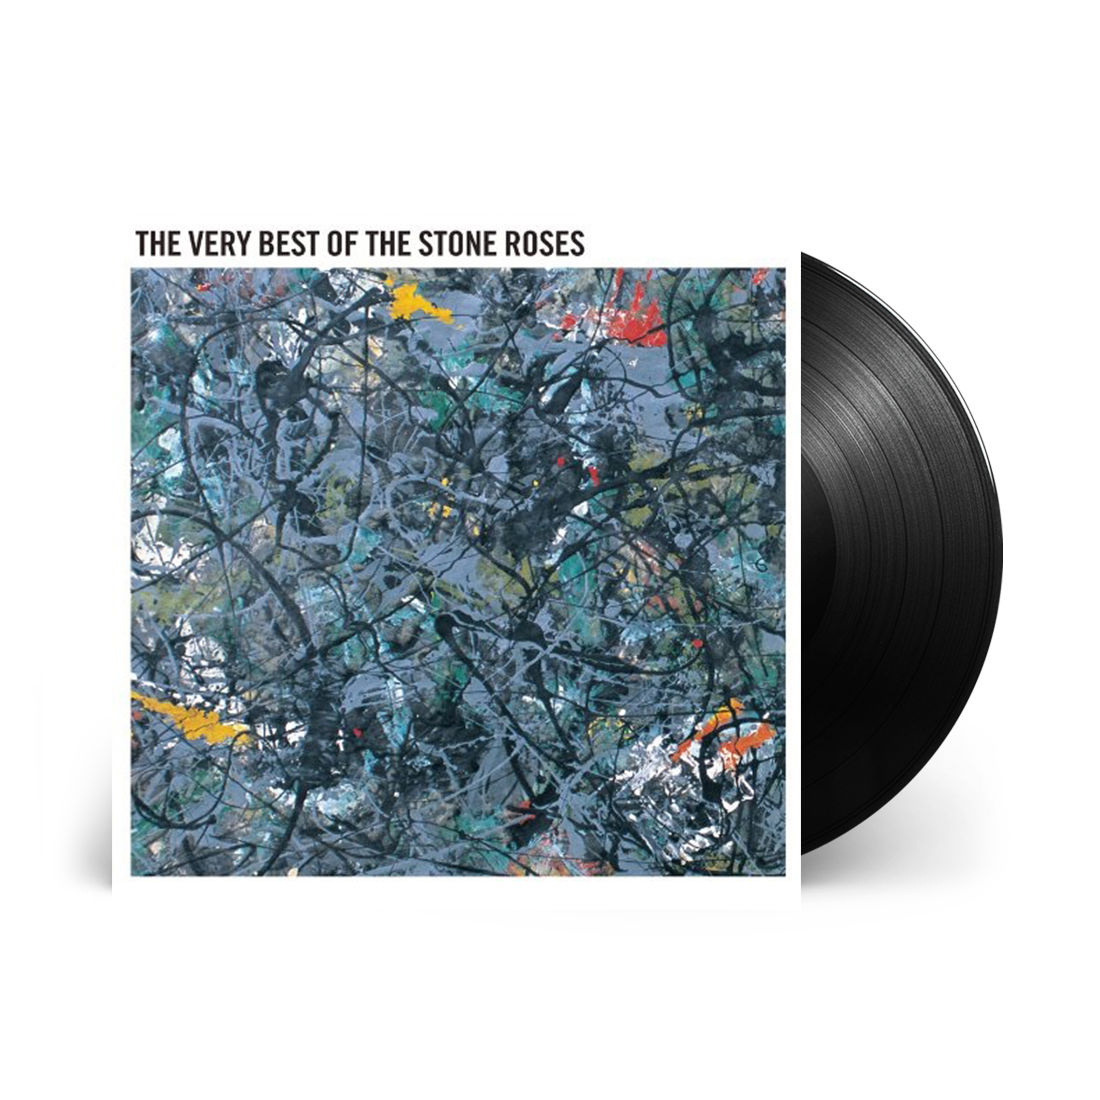 The Stone Roses - The Very Best Of The Stone Roses: Vinyl LP